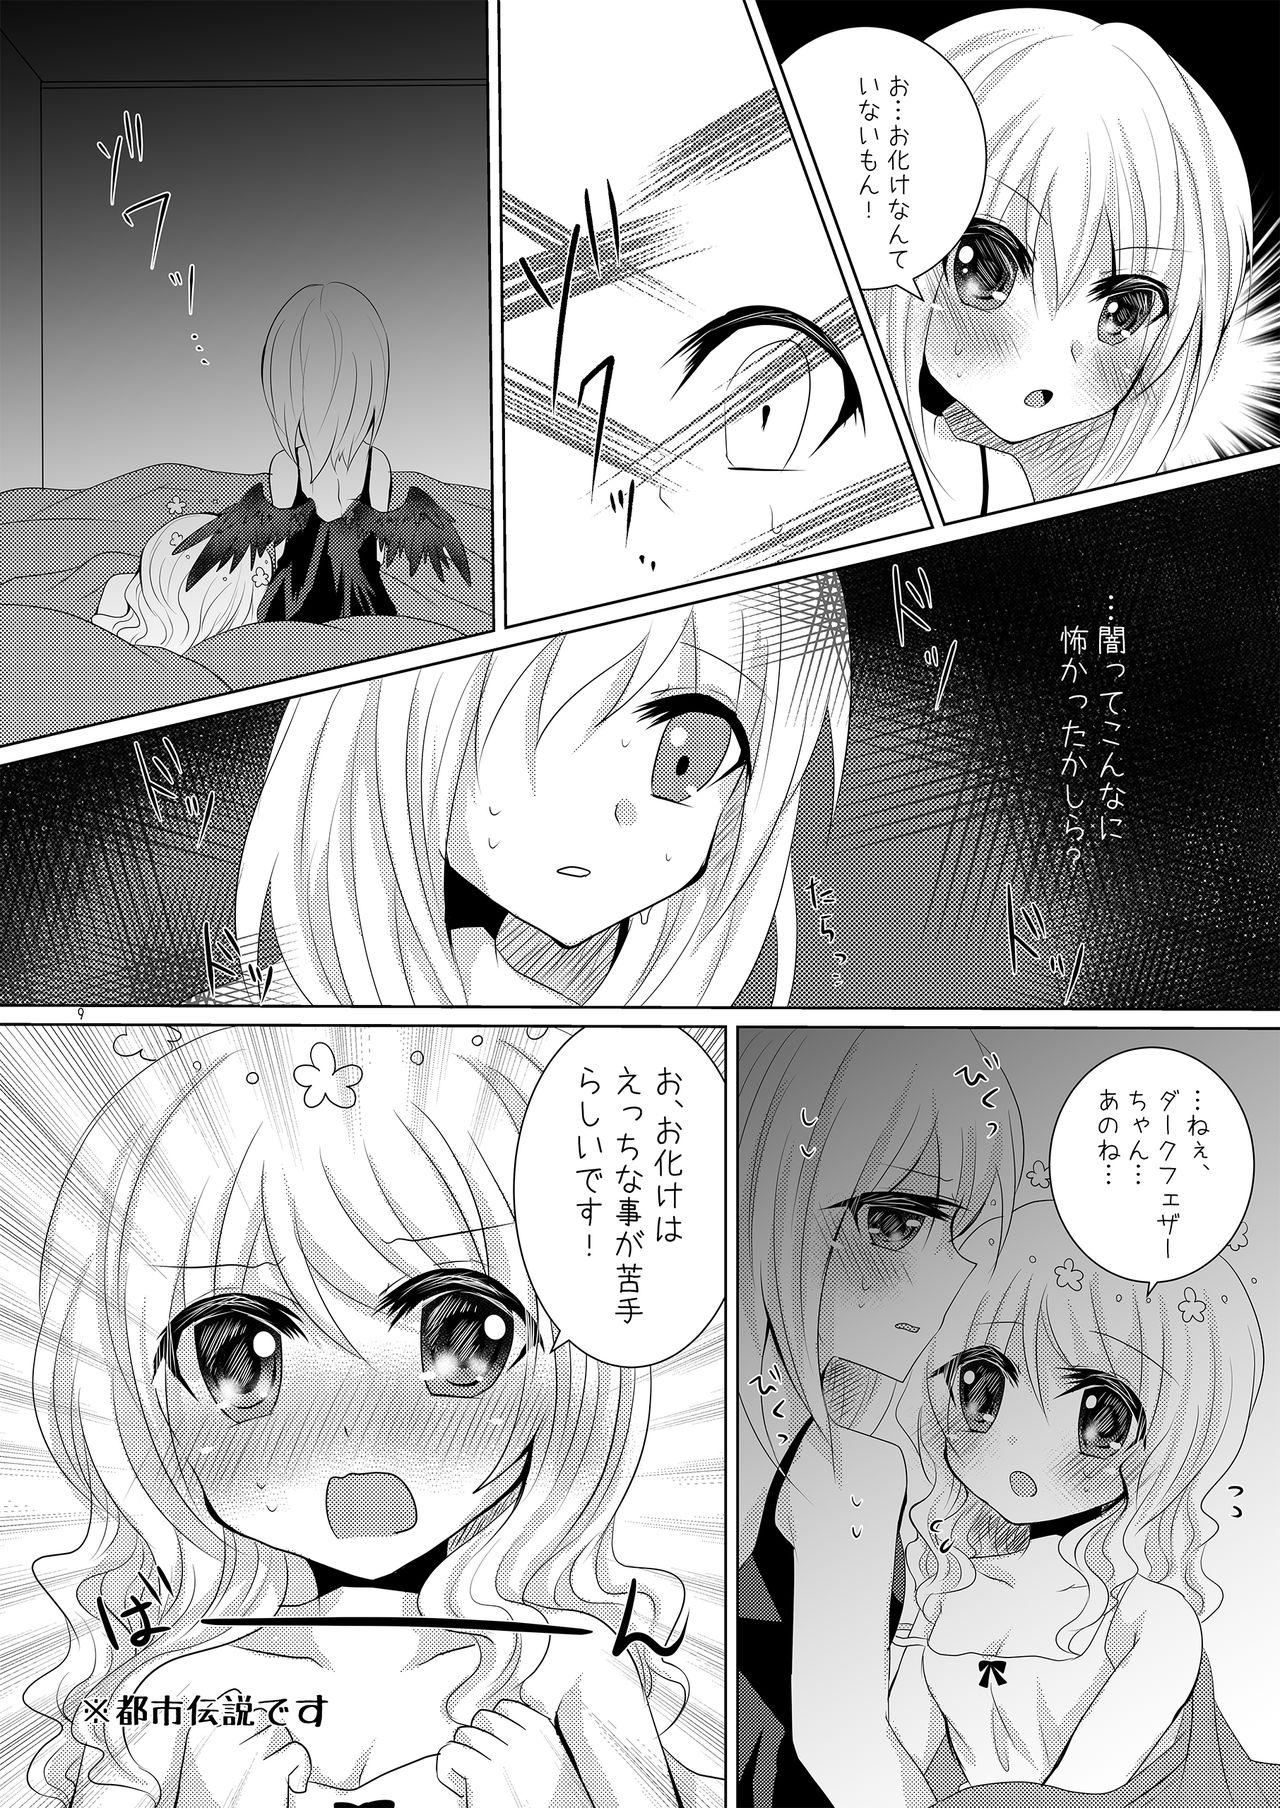 Monster Tenshi no Tawamure - Emil chronicle online Anal Creampie - Page 8